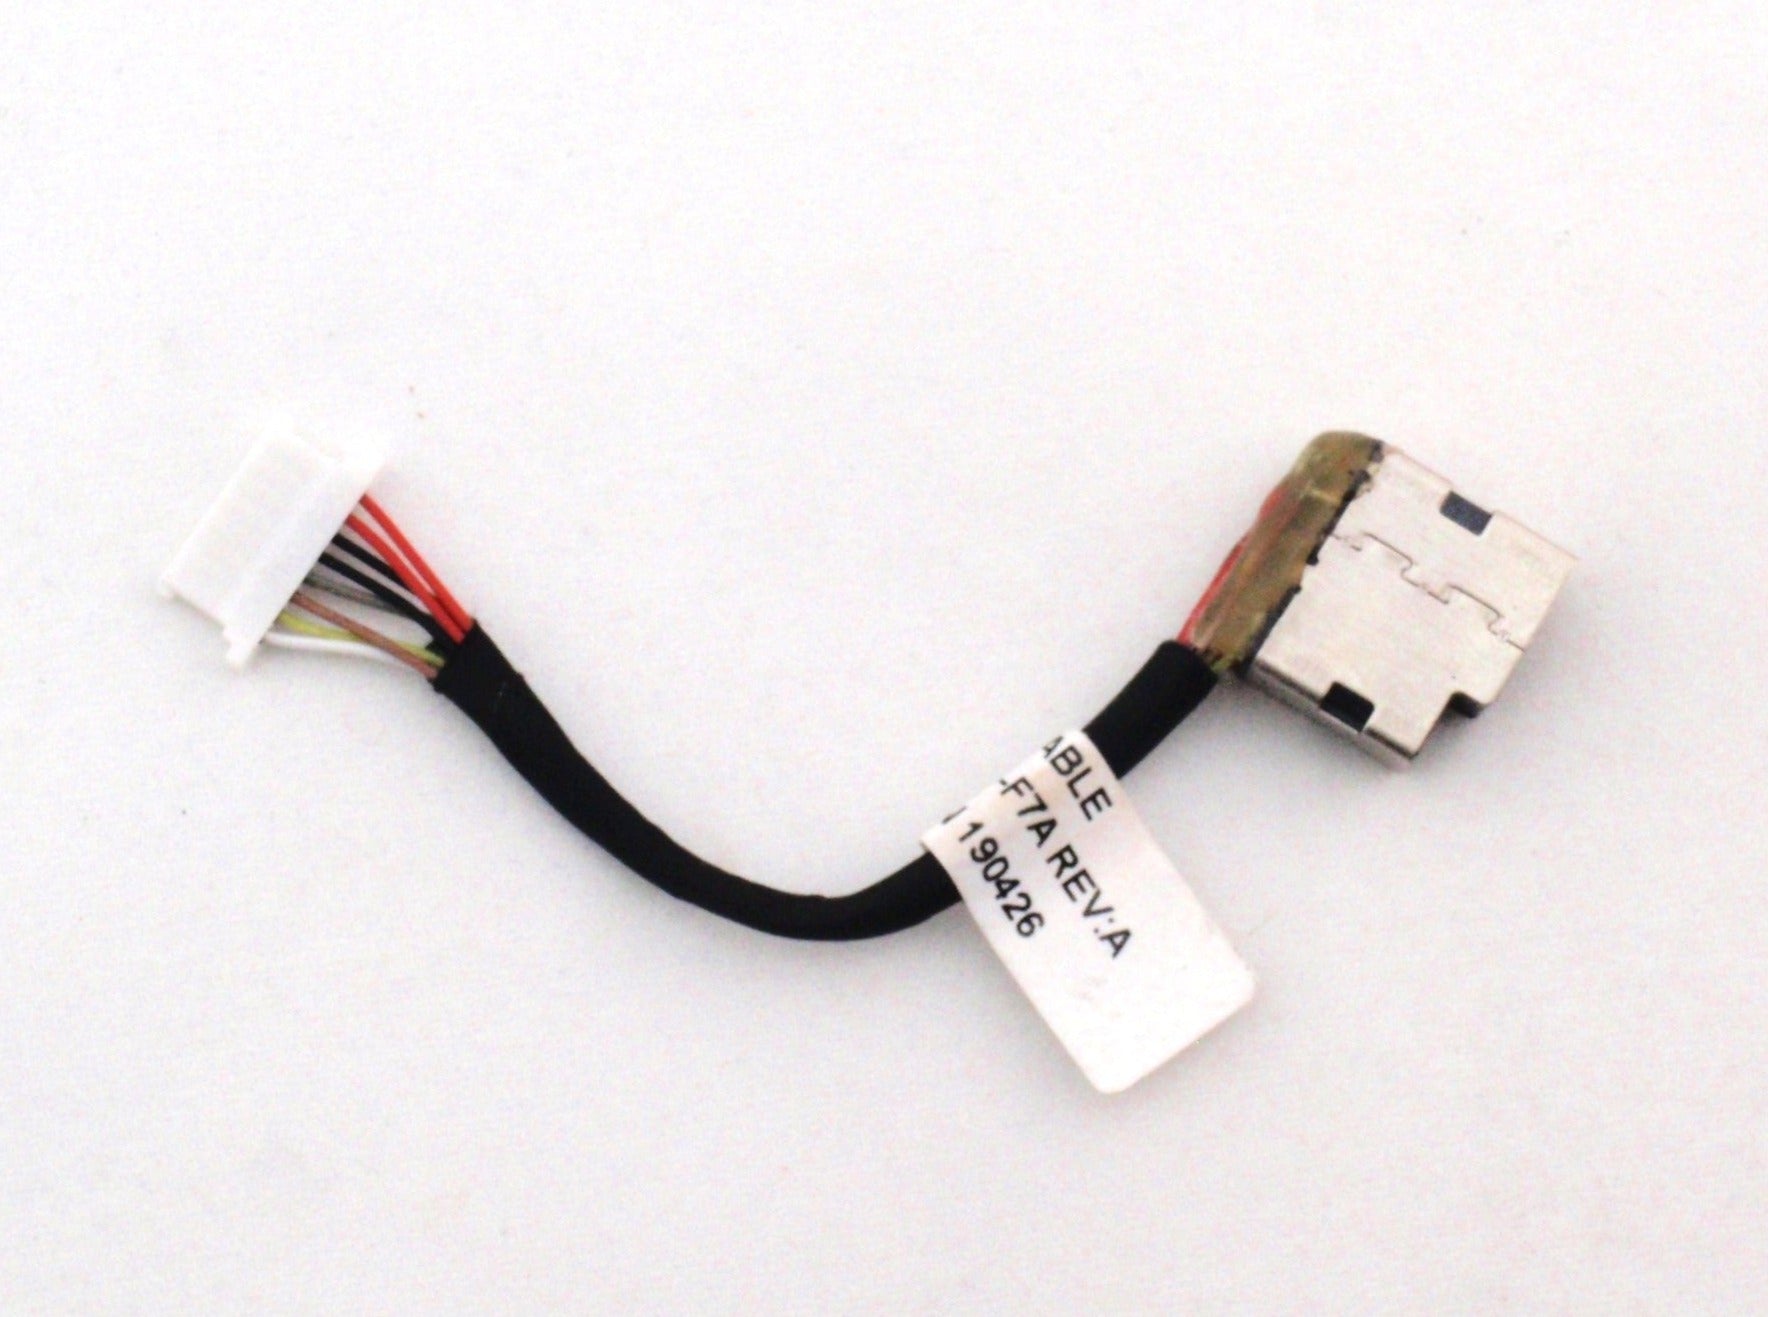 HP DC In Power Jack Charging Cable ProBook 430 440 450 470 G4 430G4 440G4 450G4 470G4 853905-F7A -S7A -Y7A CBL00760-0050 905644-001